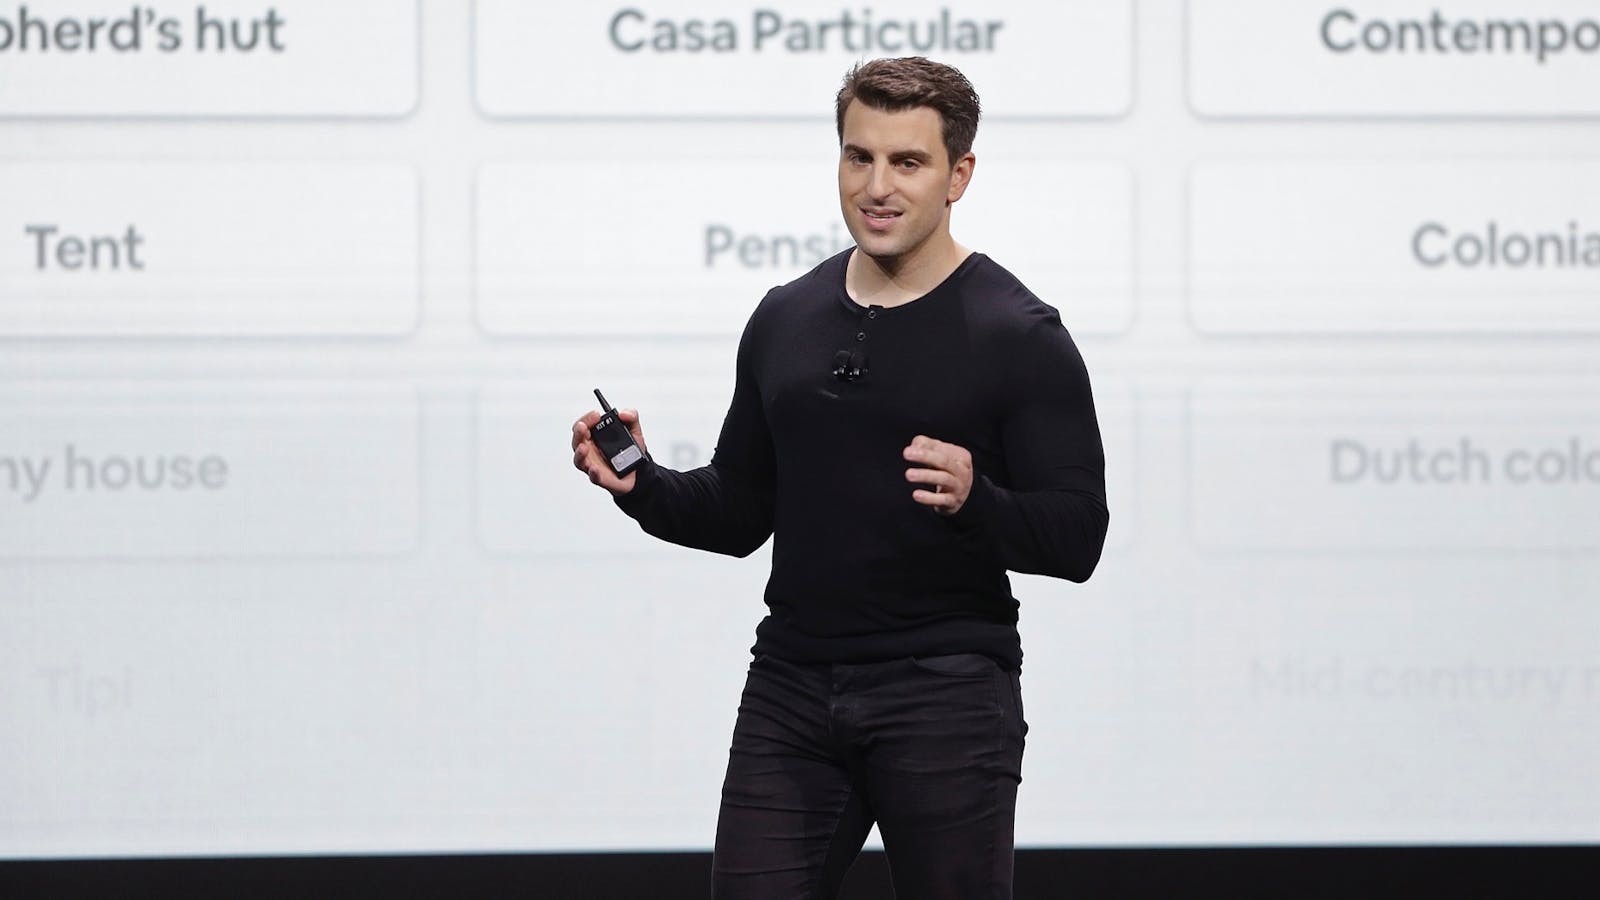 Airbnb CEO Brian Chesky speaking at an event in San Francisco in February. Photo: AP